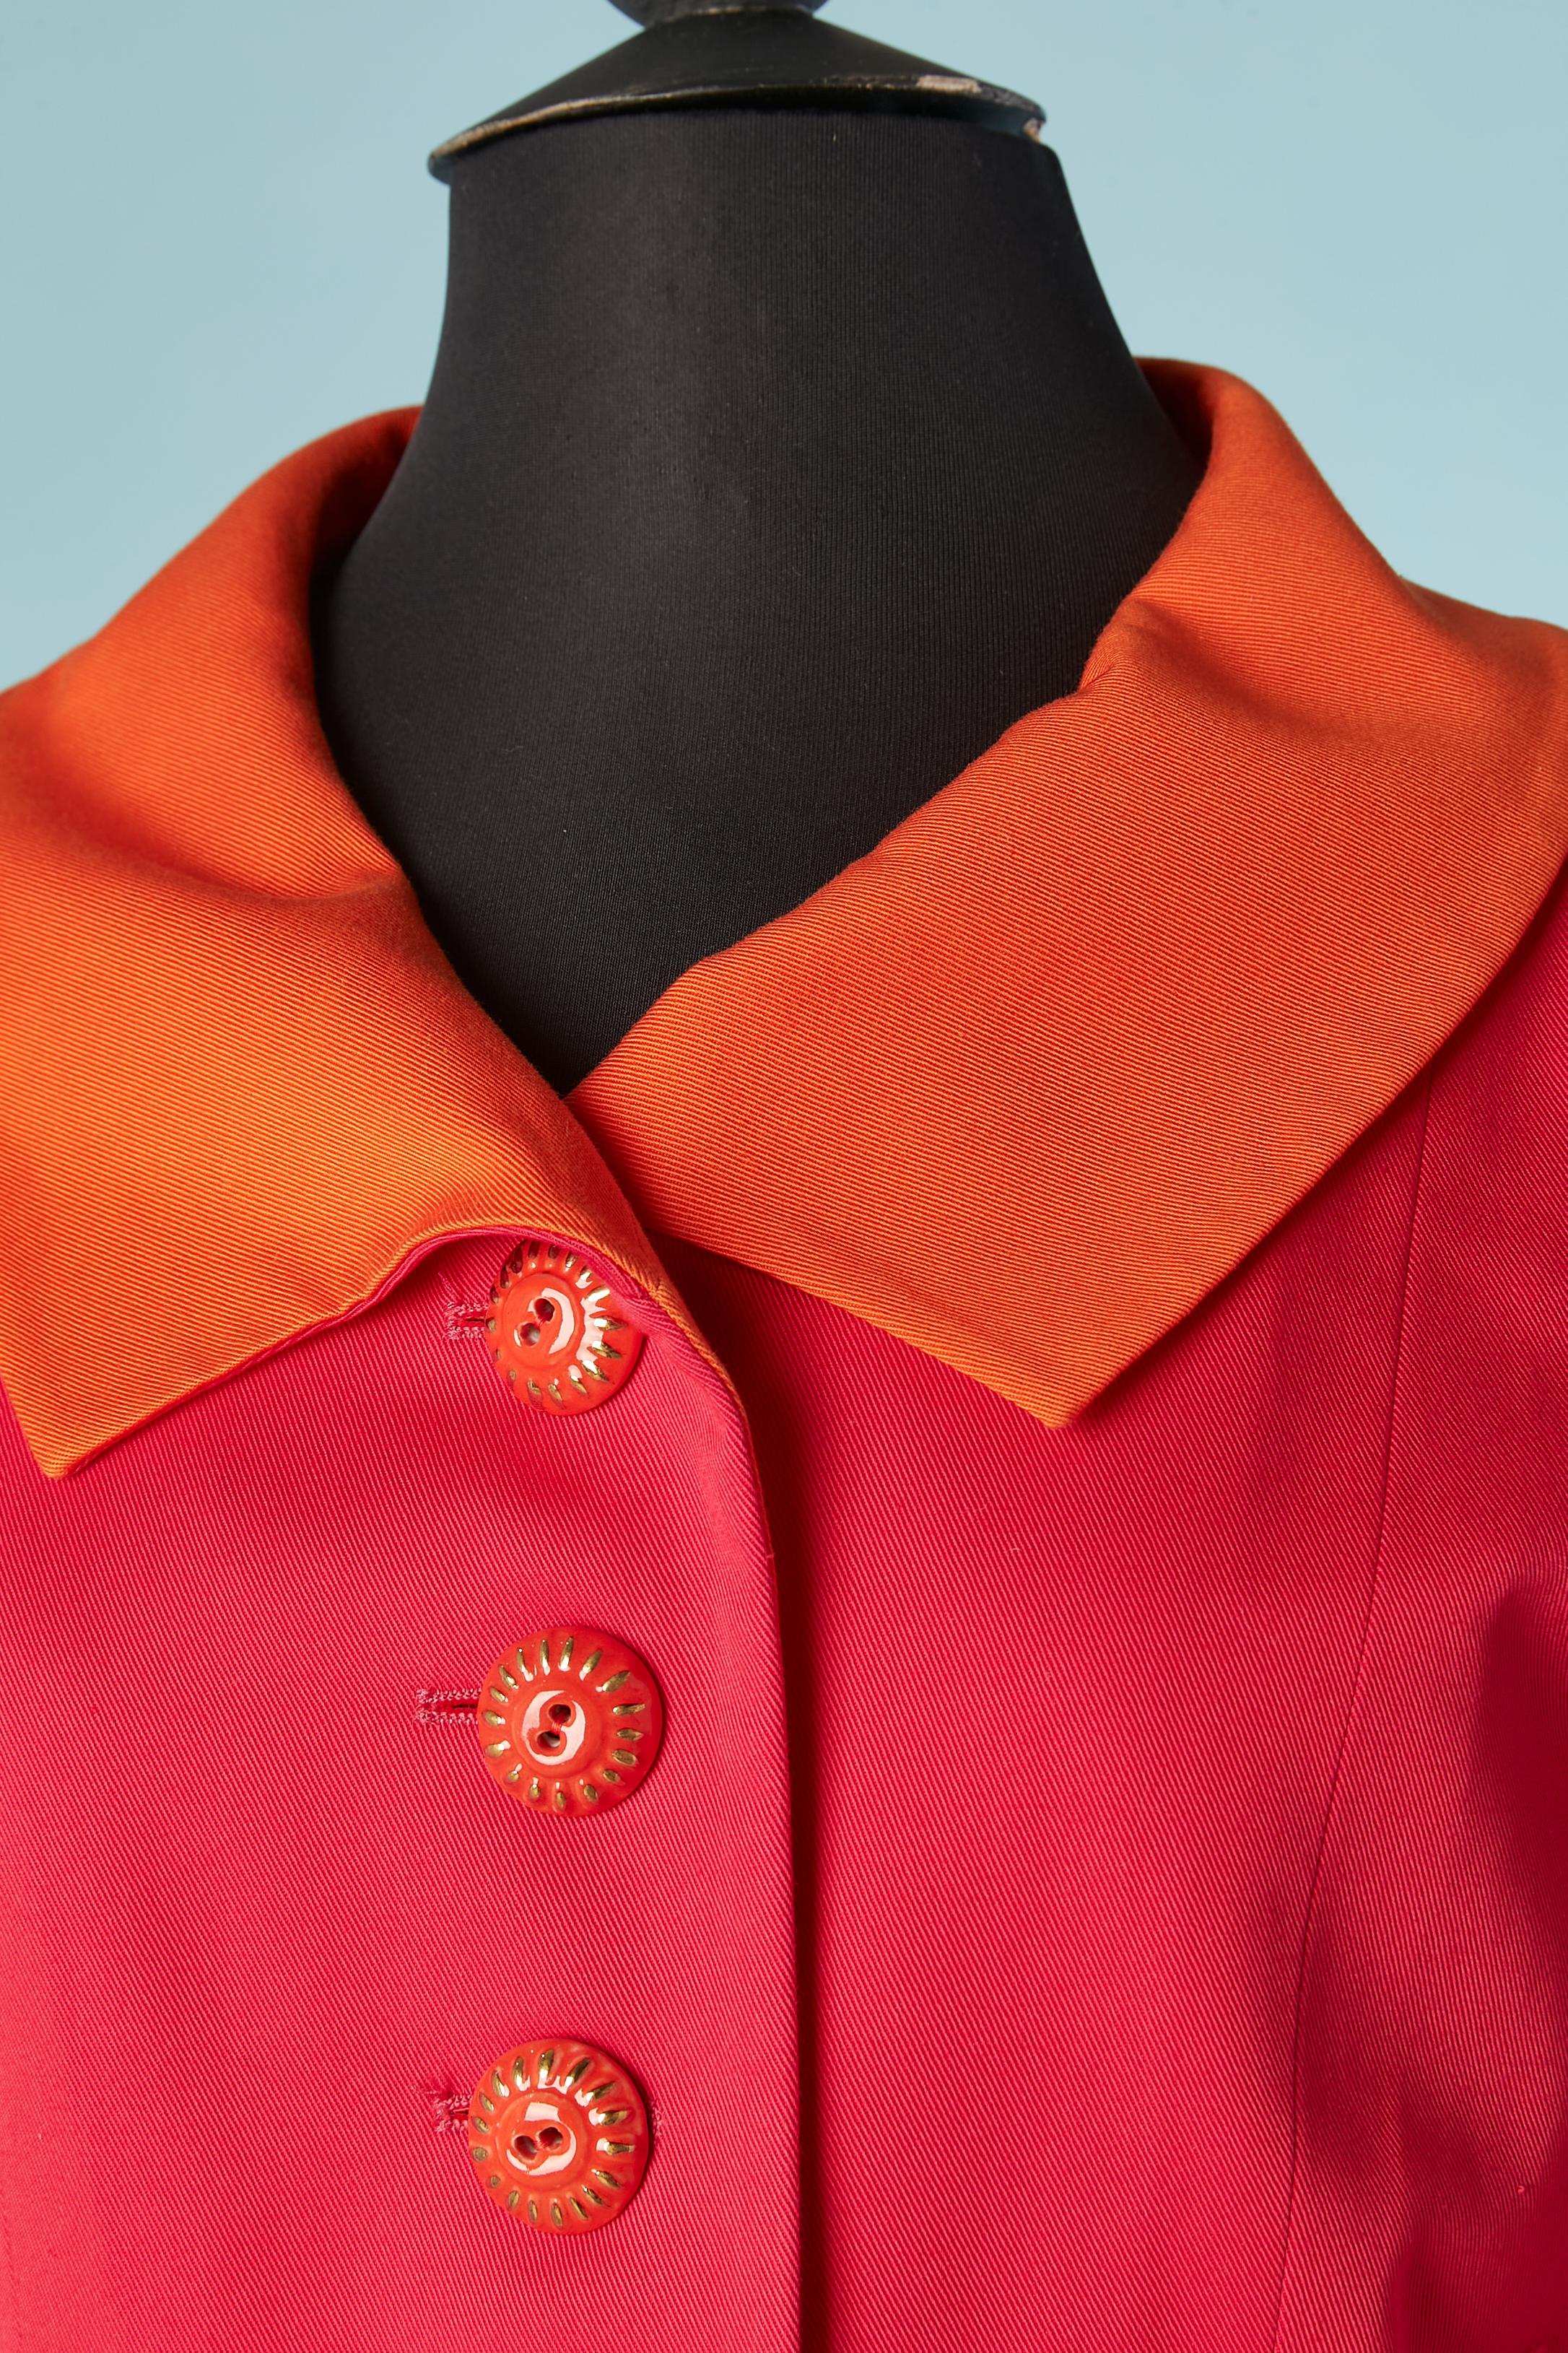 Orange and fushia jacket with ceramic buttons. Main fabric composition: 100% cotton, lining: acetate & rayon. 
Shoulder pads. Half-belt with 2 buttons on the middle back. 
SIZE 36 on tag but fit more likely M/L